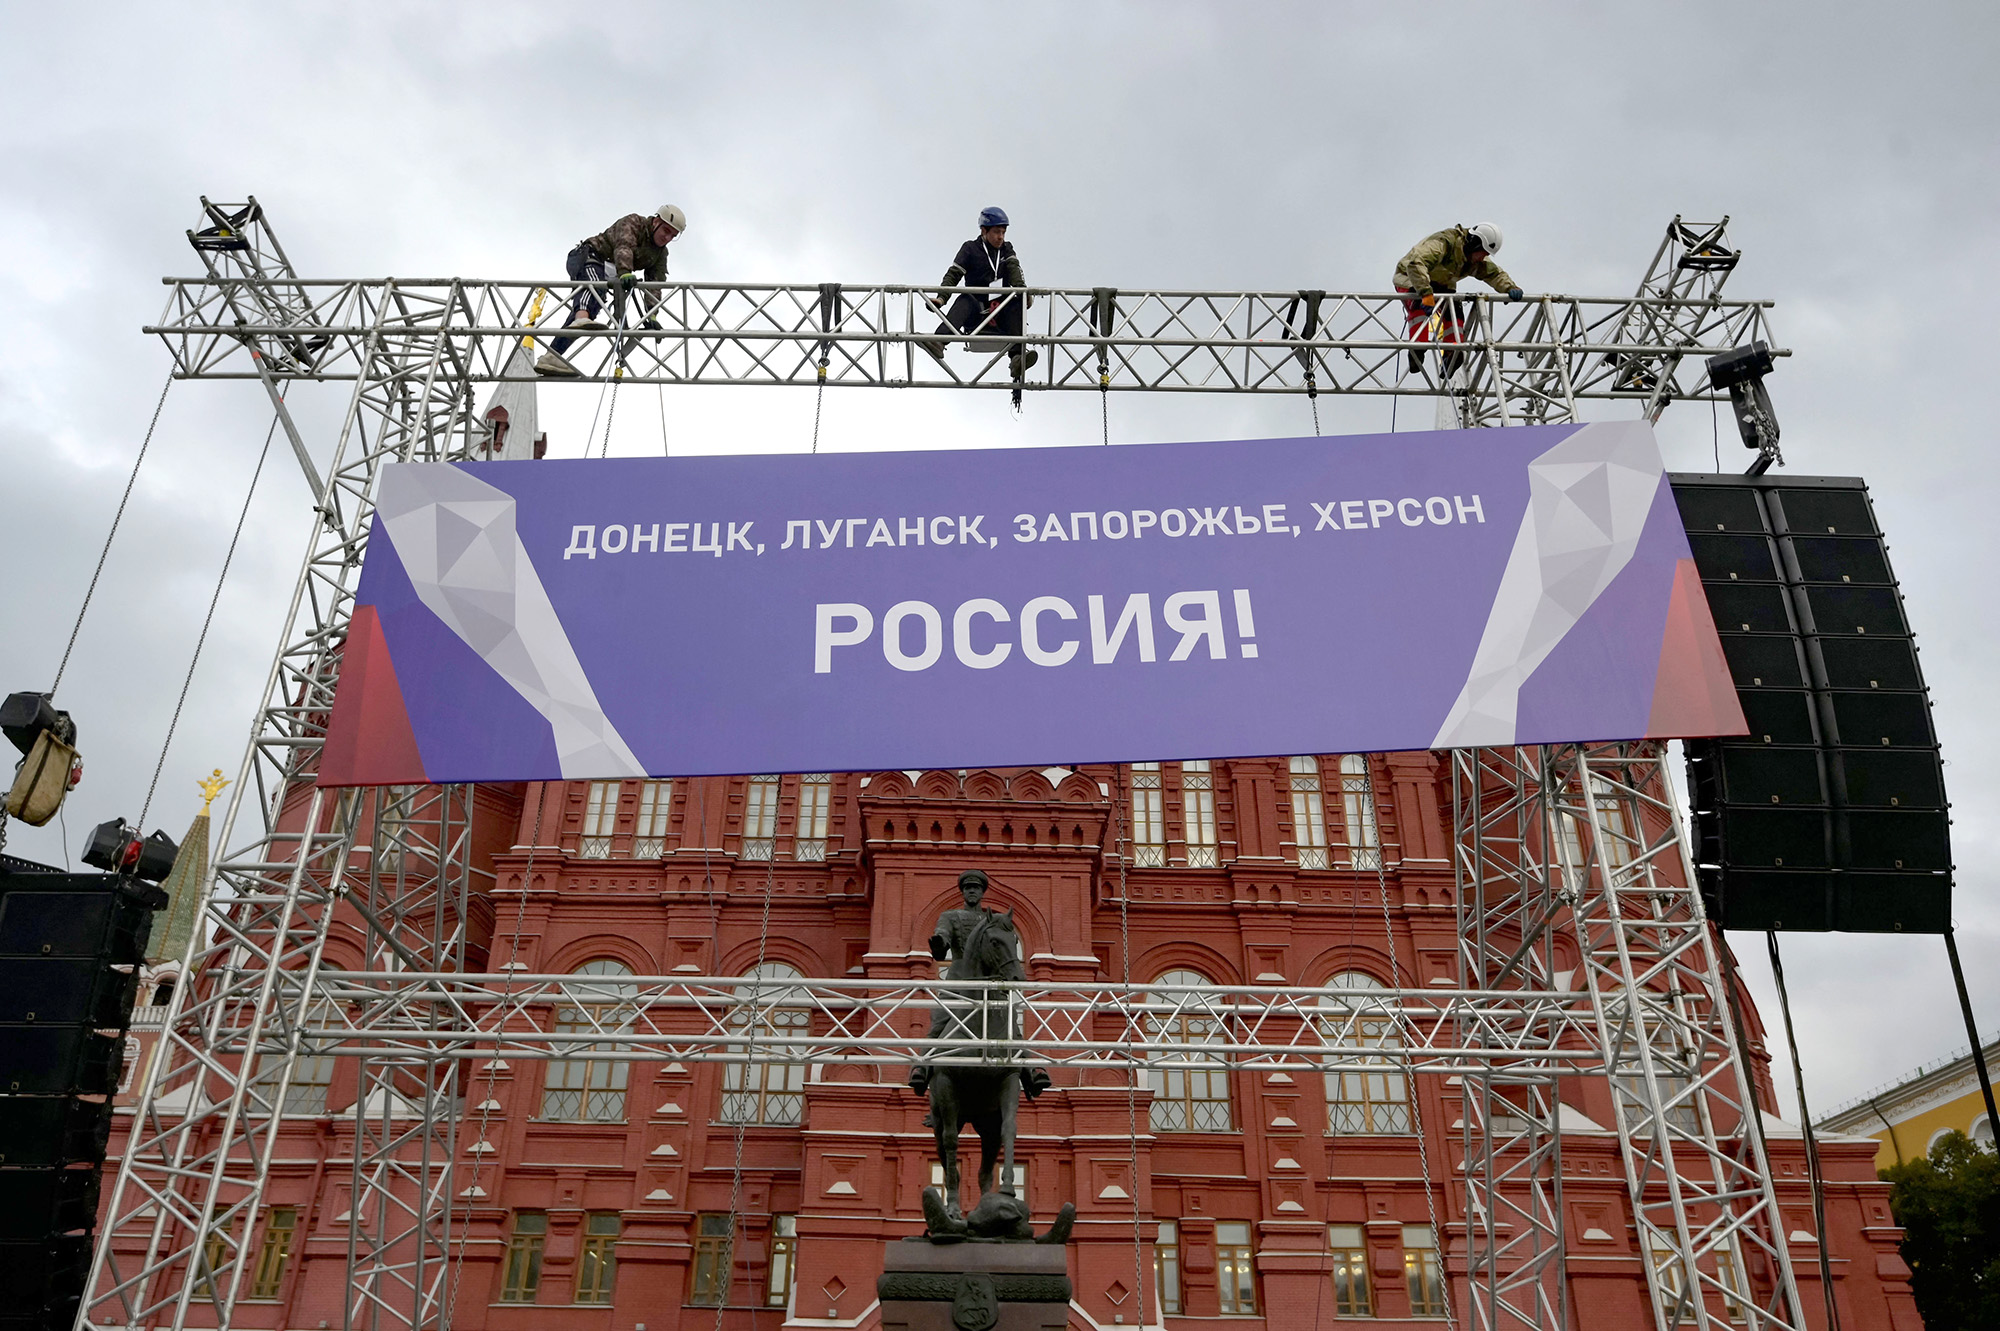 Workers fix a banner reading "Donetsk, Lugansk, Zaporizhzhia, Kherson - Russia!" on top of a construction installed in front of the State Historical Museum outside Red Square in central Moscow, Russia, on September 29.